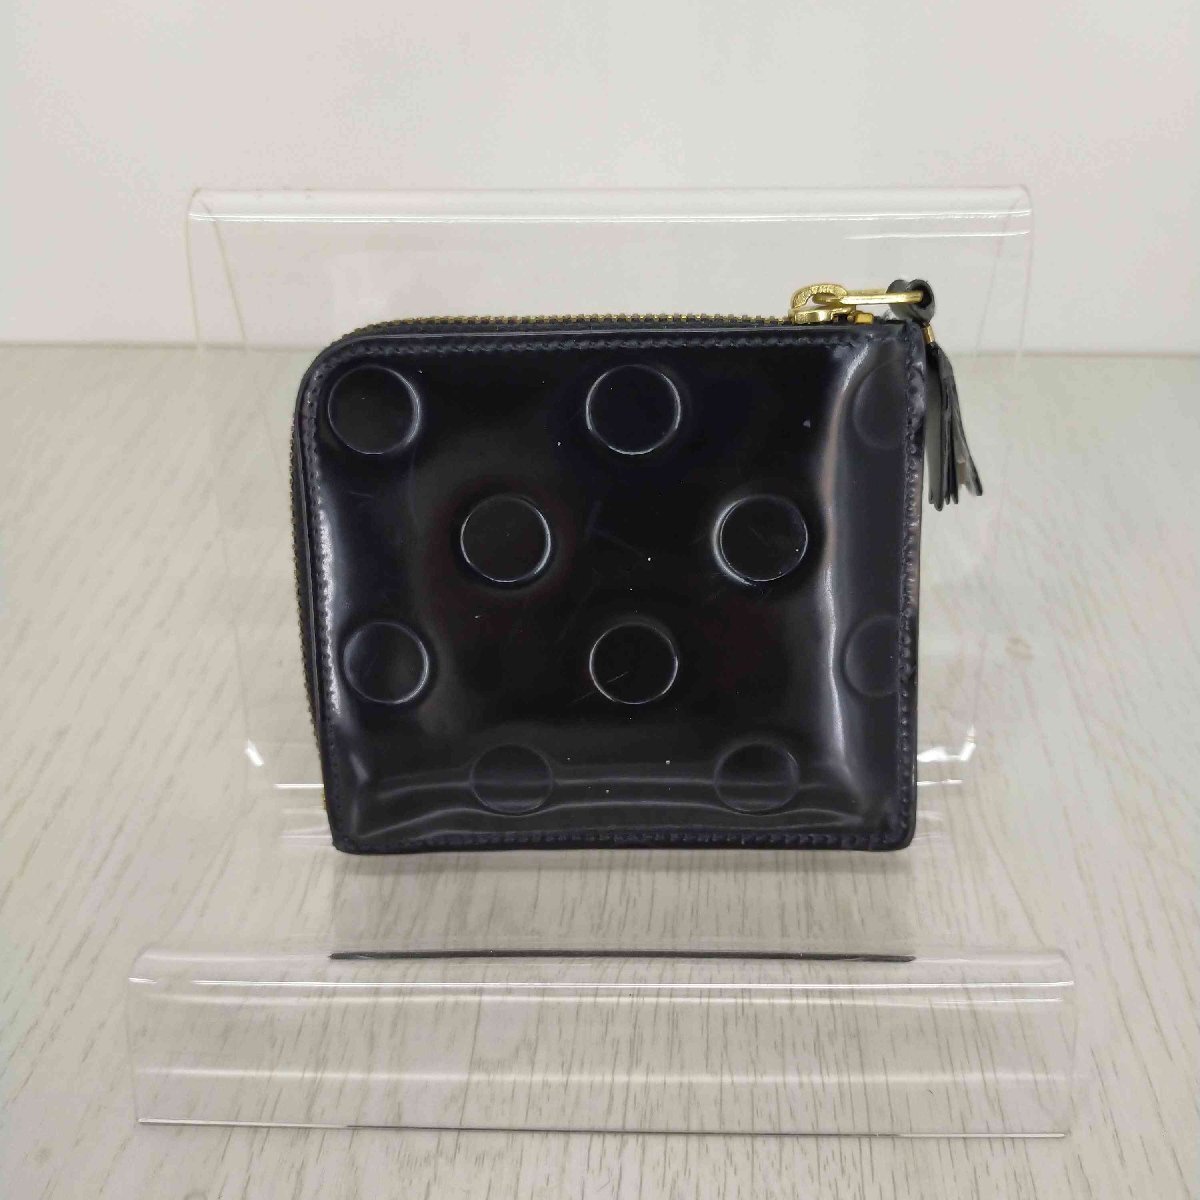 COMME des GARCONS(コムデギャルソン) POLKA DOTS EMBOSSED ウォレット 中古 古着 0242_画像2